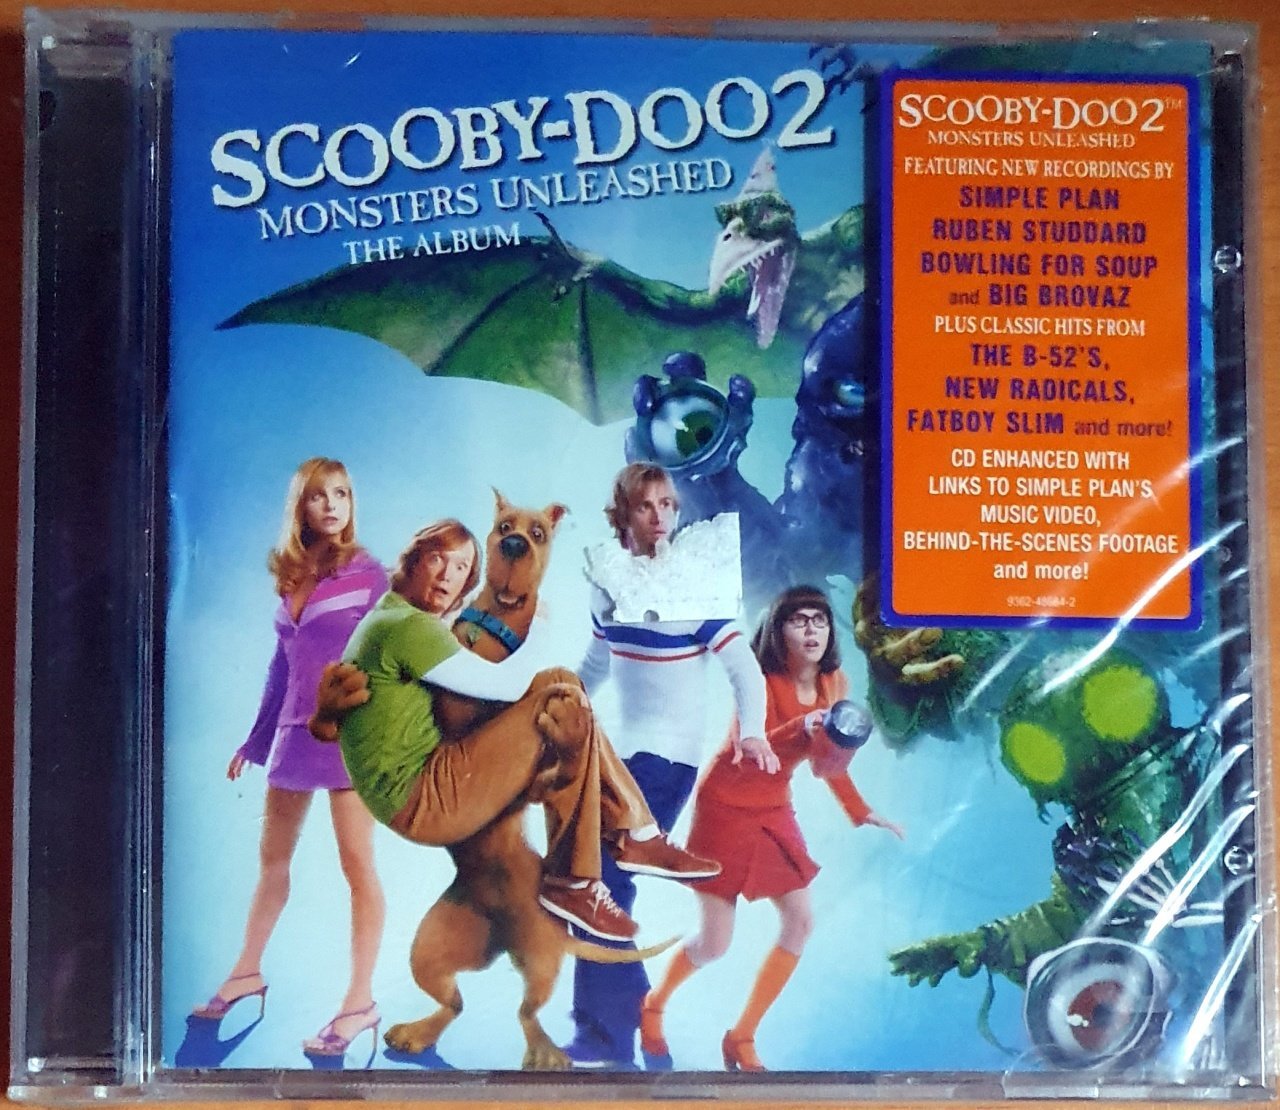 SCOOBY-DOO 2: MONSTERS UNLEASHED SOUNDTRACK / 2 UNLIMITED, NEW RADICALS, FATBOY SLIM, THE B-52'S, BAD MANNERS (2004) - CD SIFIR